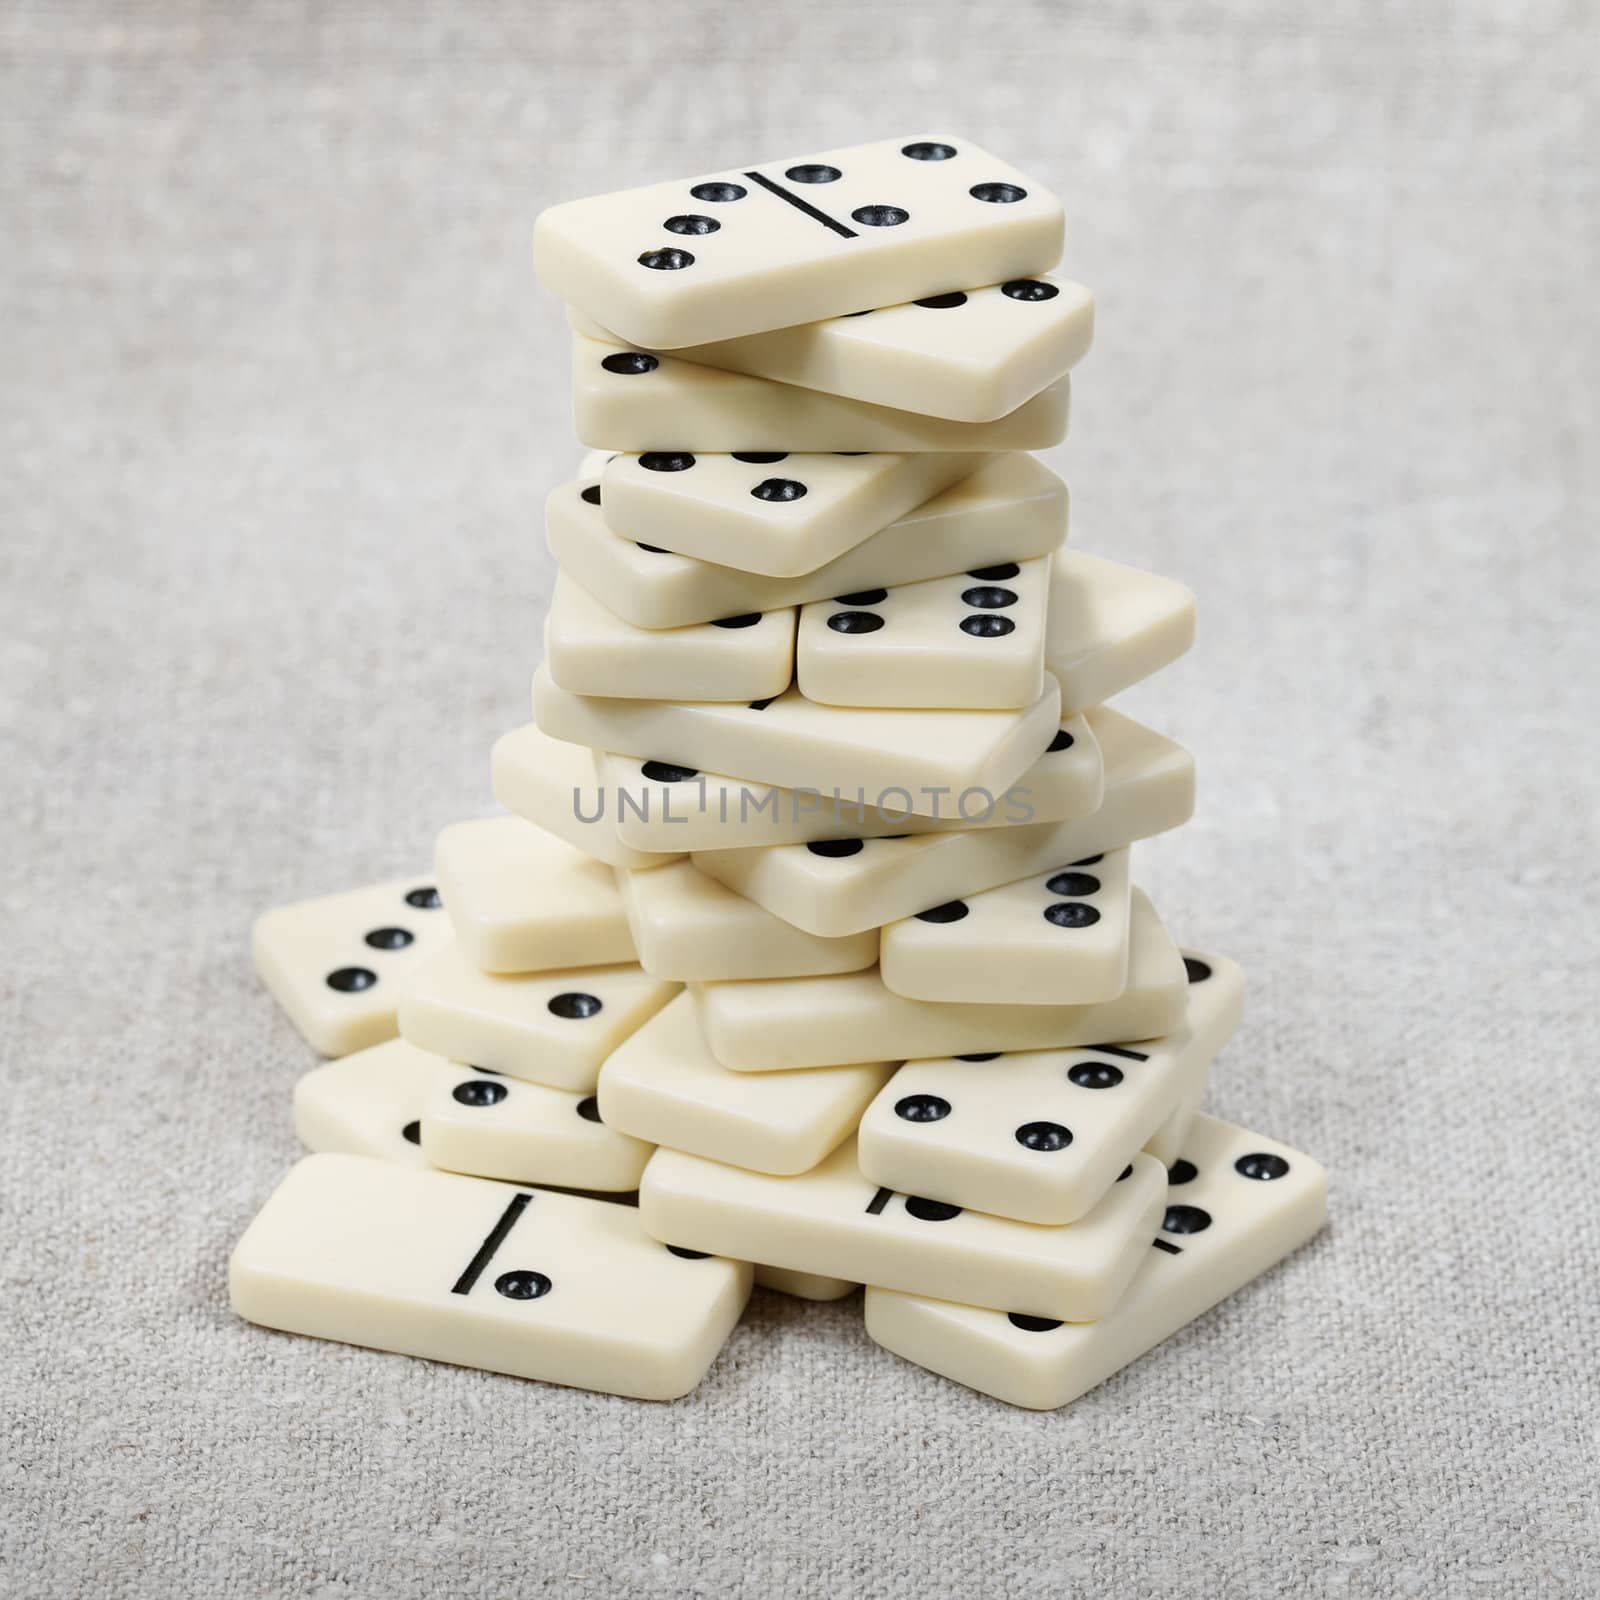 The big heap of ancient counters of dominoes against a canvas